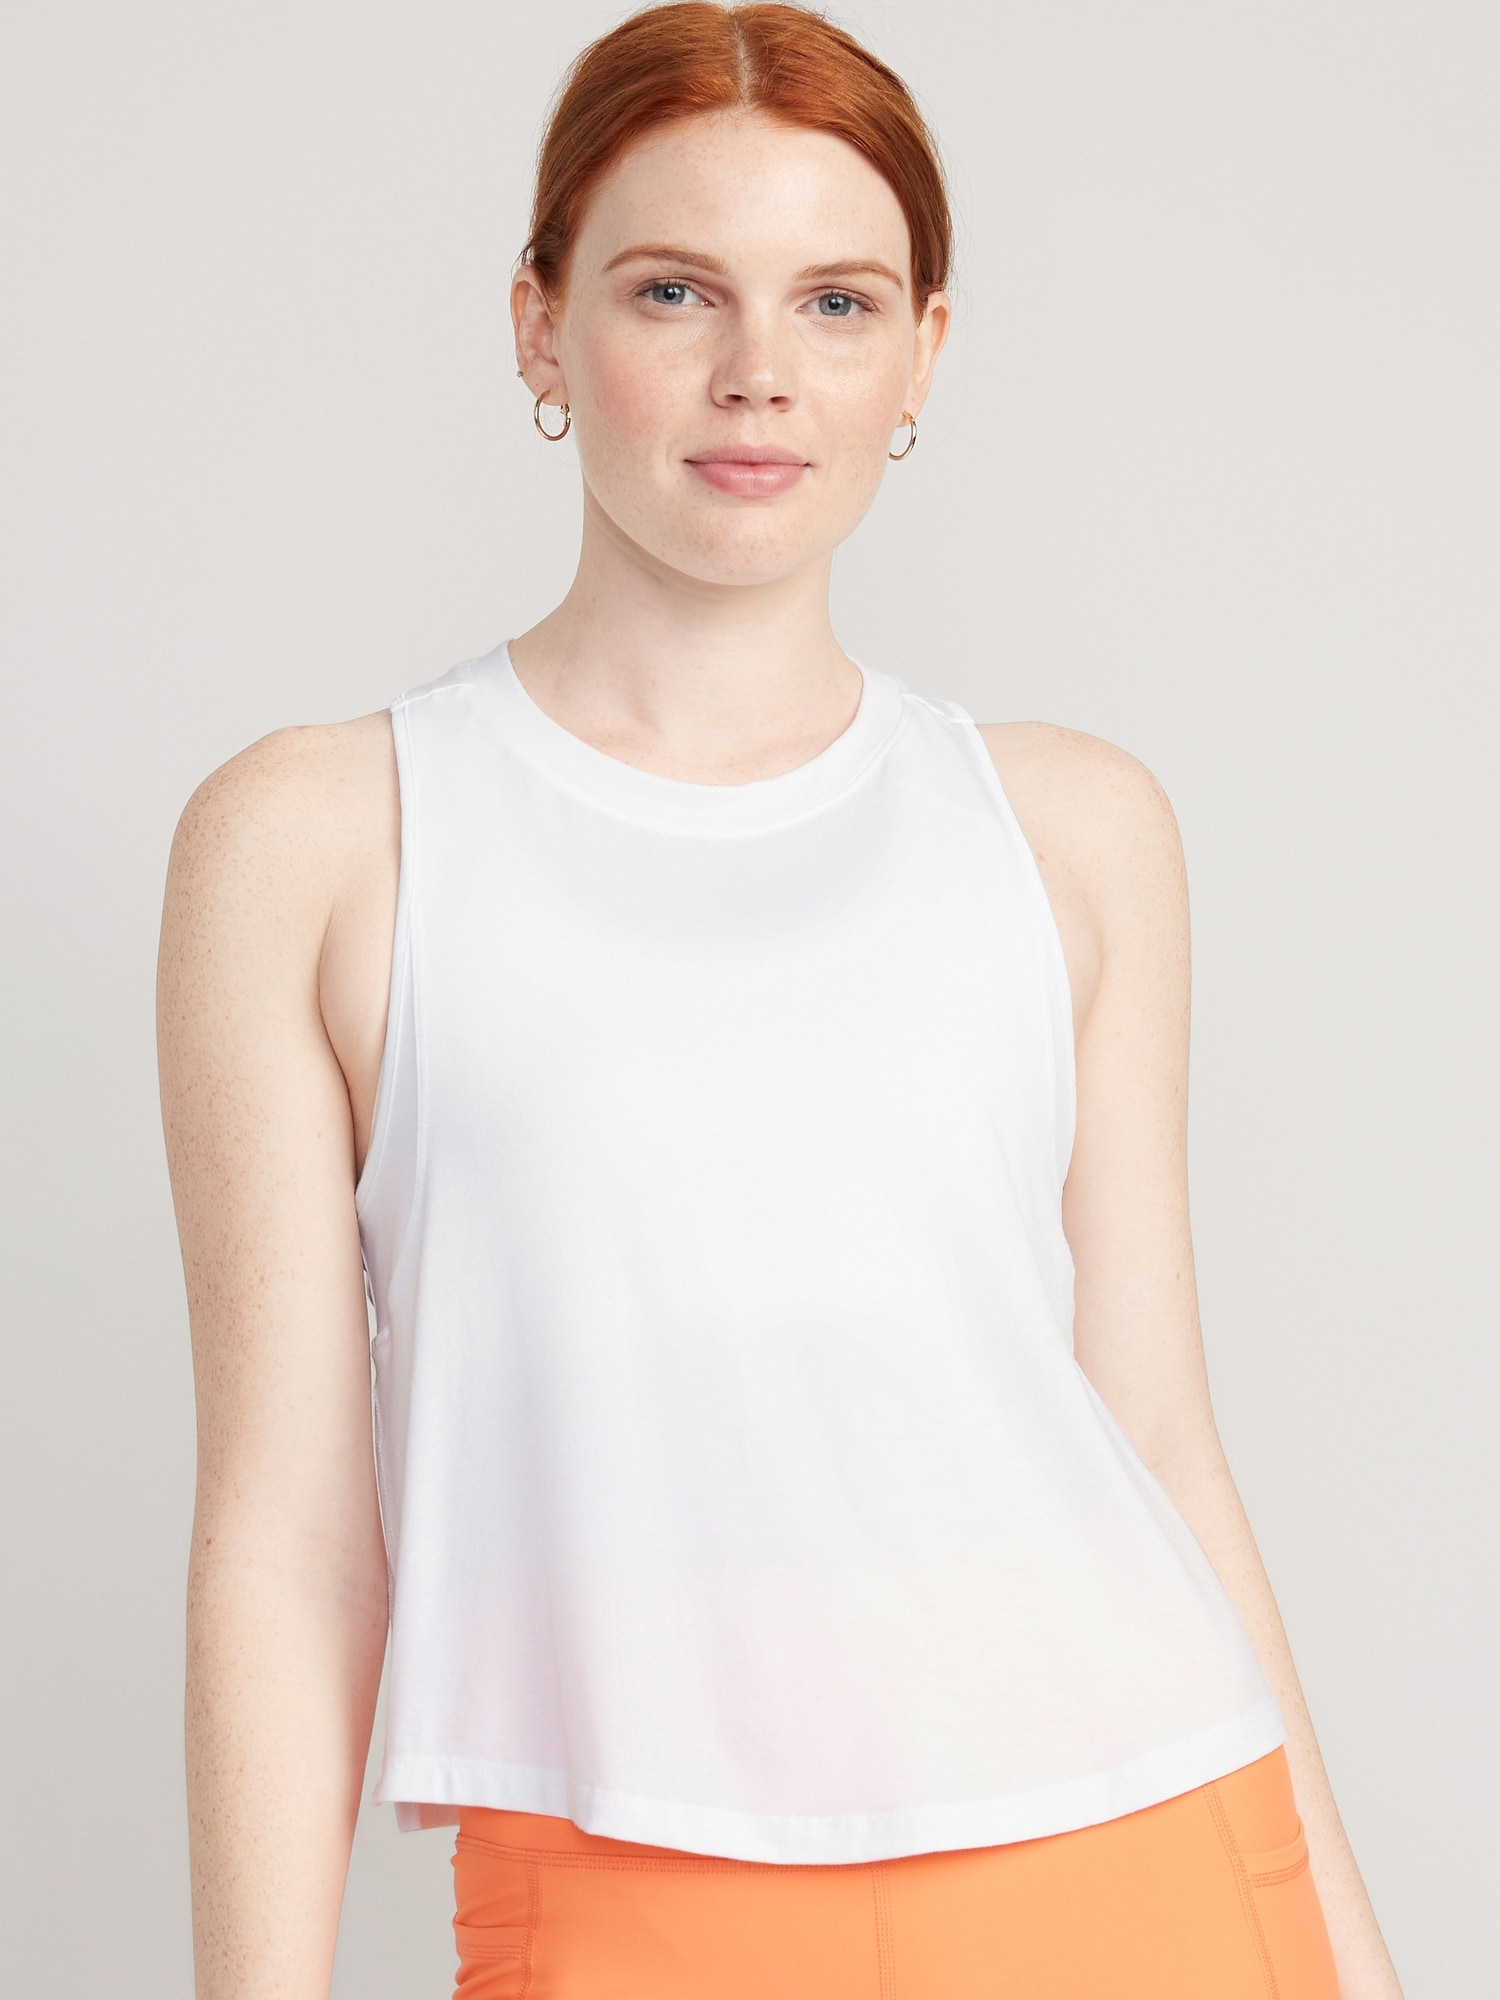 Old Navy UltraLite All-Day Sleeveless Cropped Top for Women white. 1